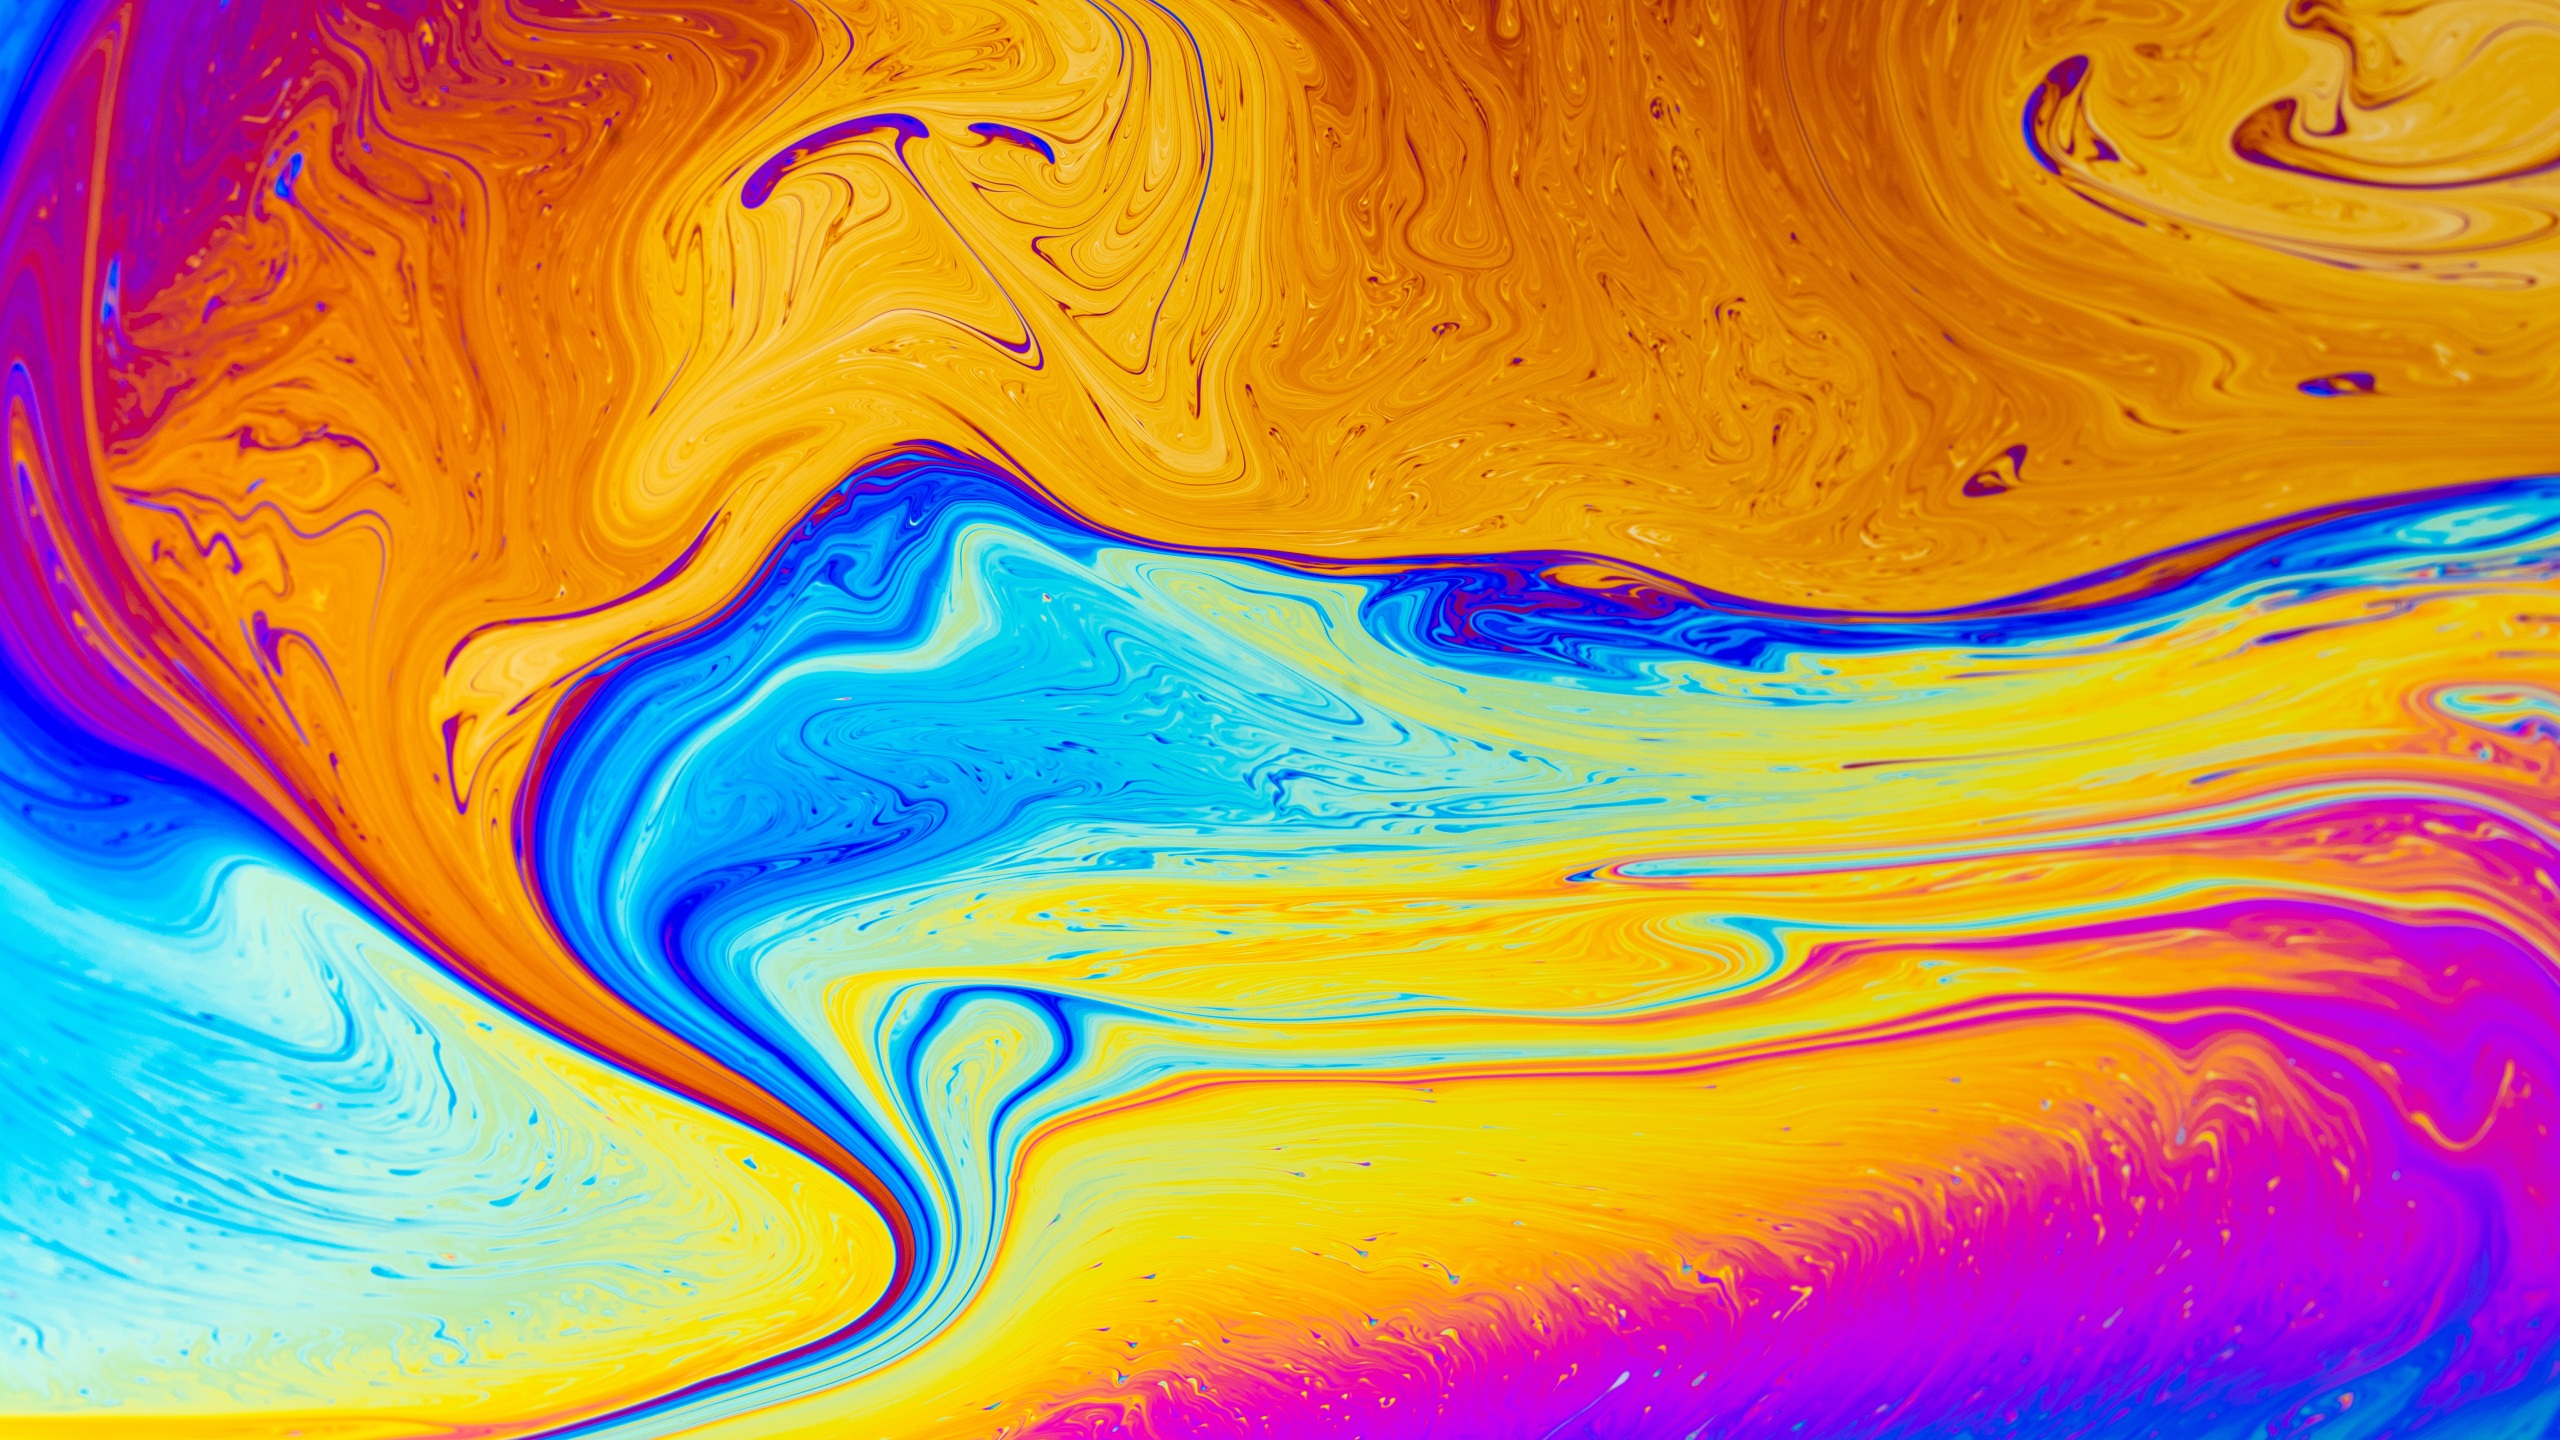 Soap Film Abstract - 4k Wallpapers - 40.000+ ipad wallpapers 4k - 4k ...